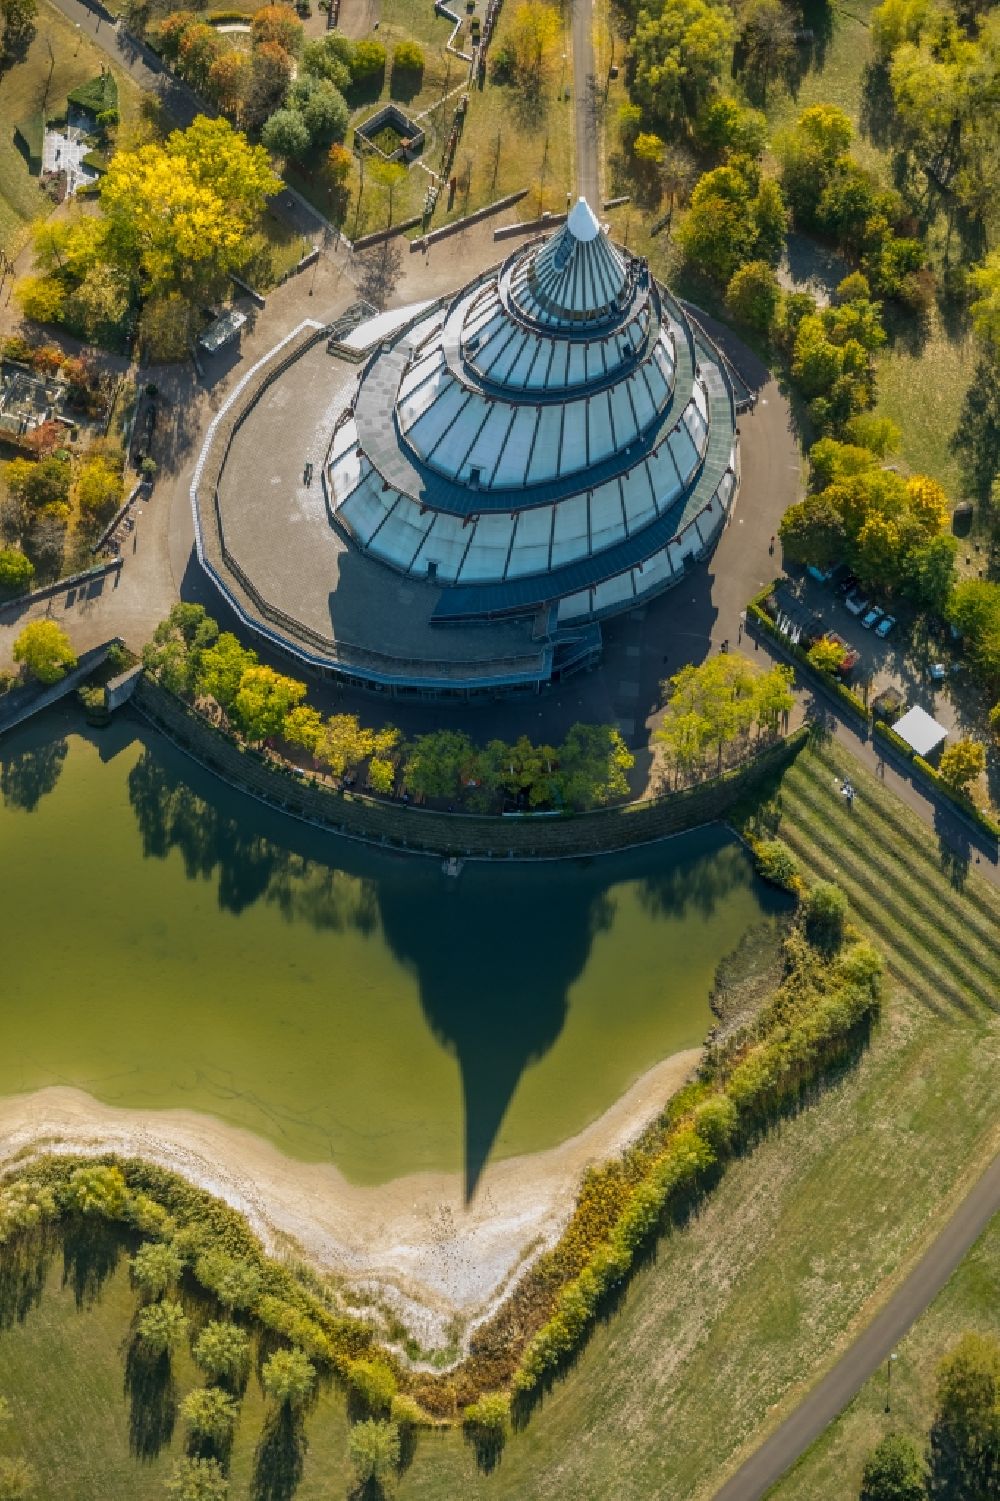 Magdeburg from above - View of the Millennium Tower in Elbauenpark. The Millennium Tower in Magdeburg is was built at the Federal Garden Show